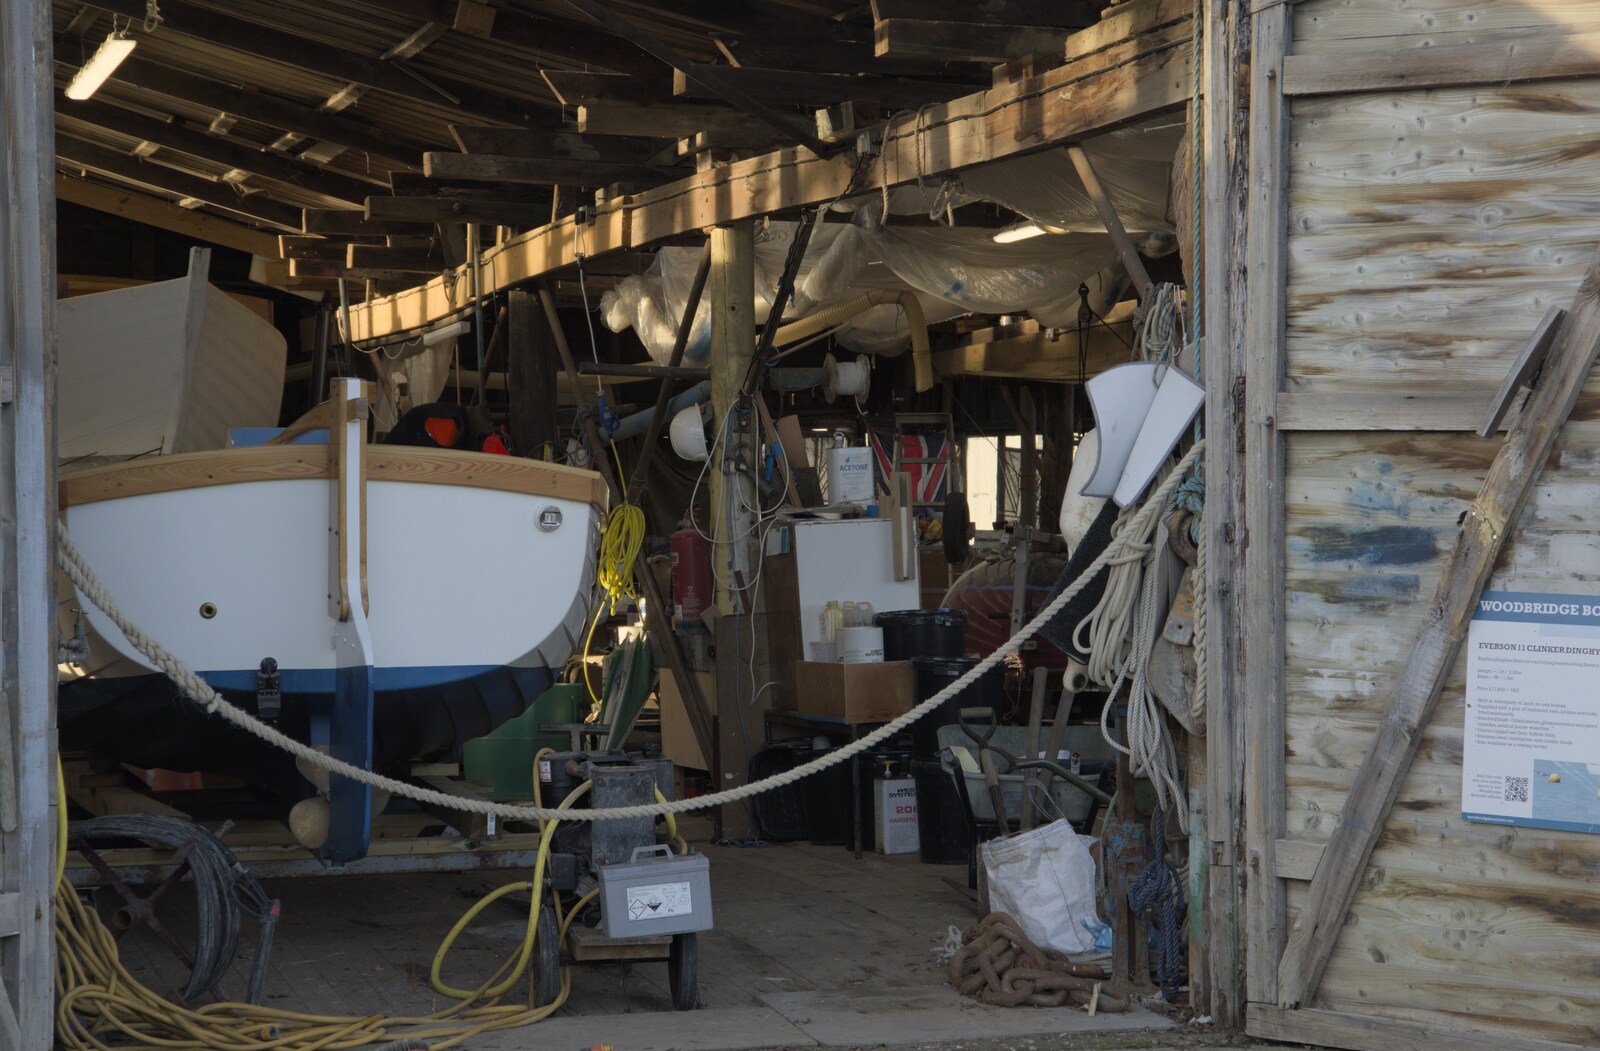 The boat workshop by the river from A February Miscellany, Diss and Woodbridge, Suffolk - 3rd February 2024